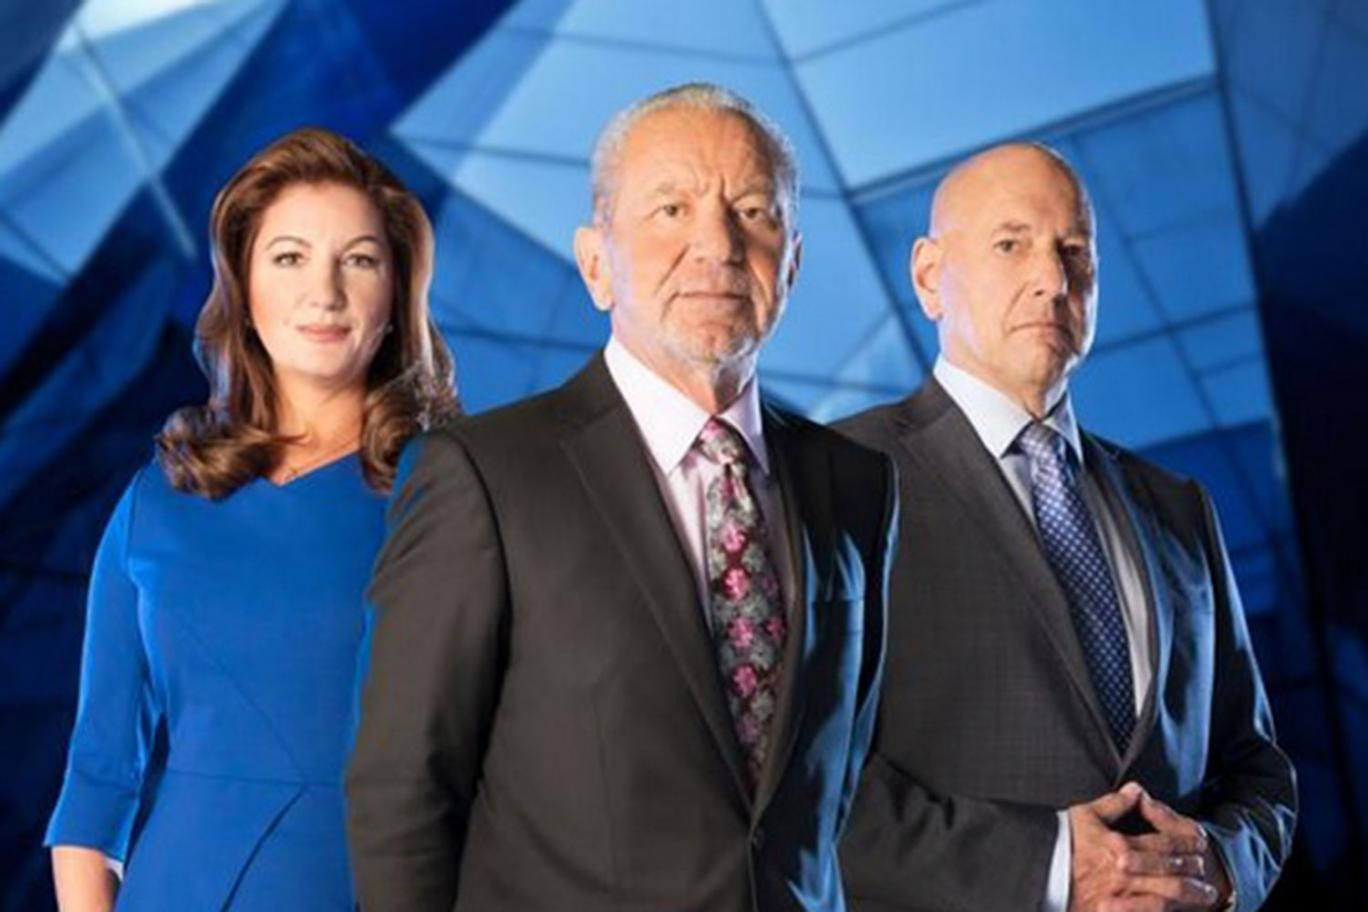 The Apprentice returns to our screens!